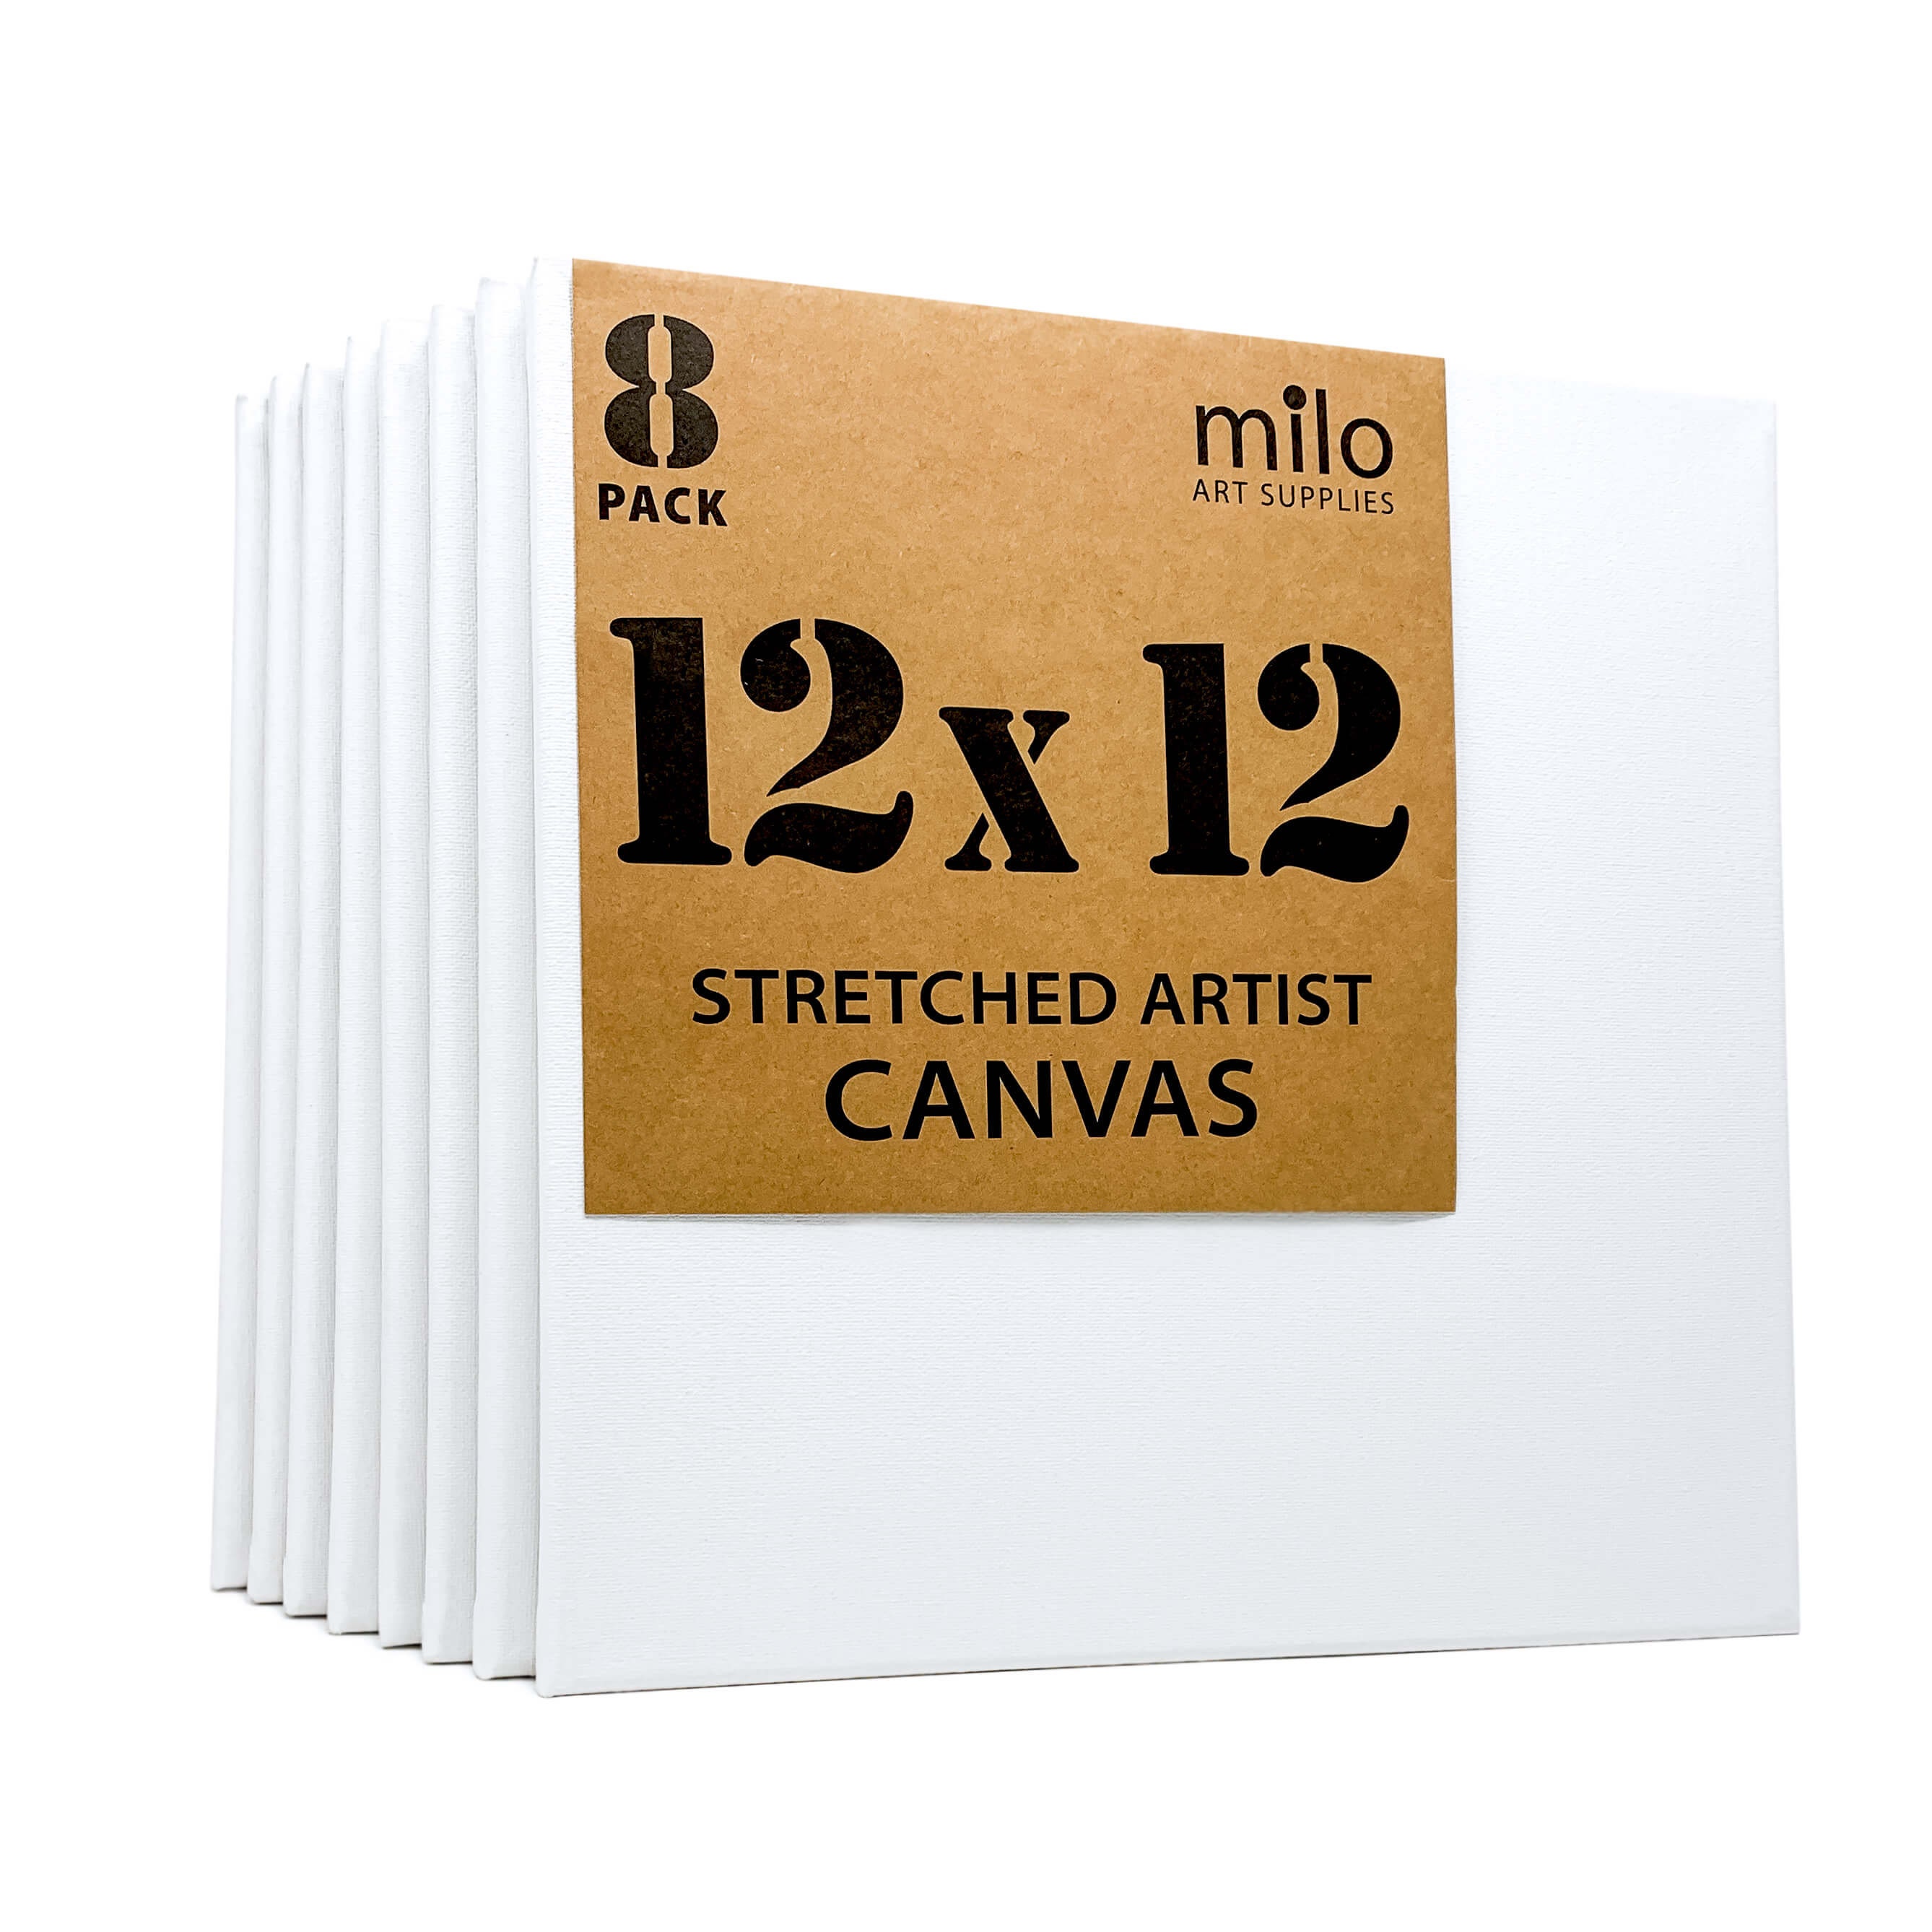 milo Stretched Artist Canvas, 30x40 inches, 4 Pack